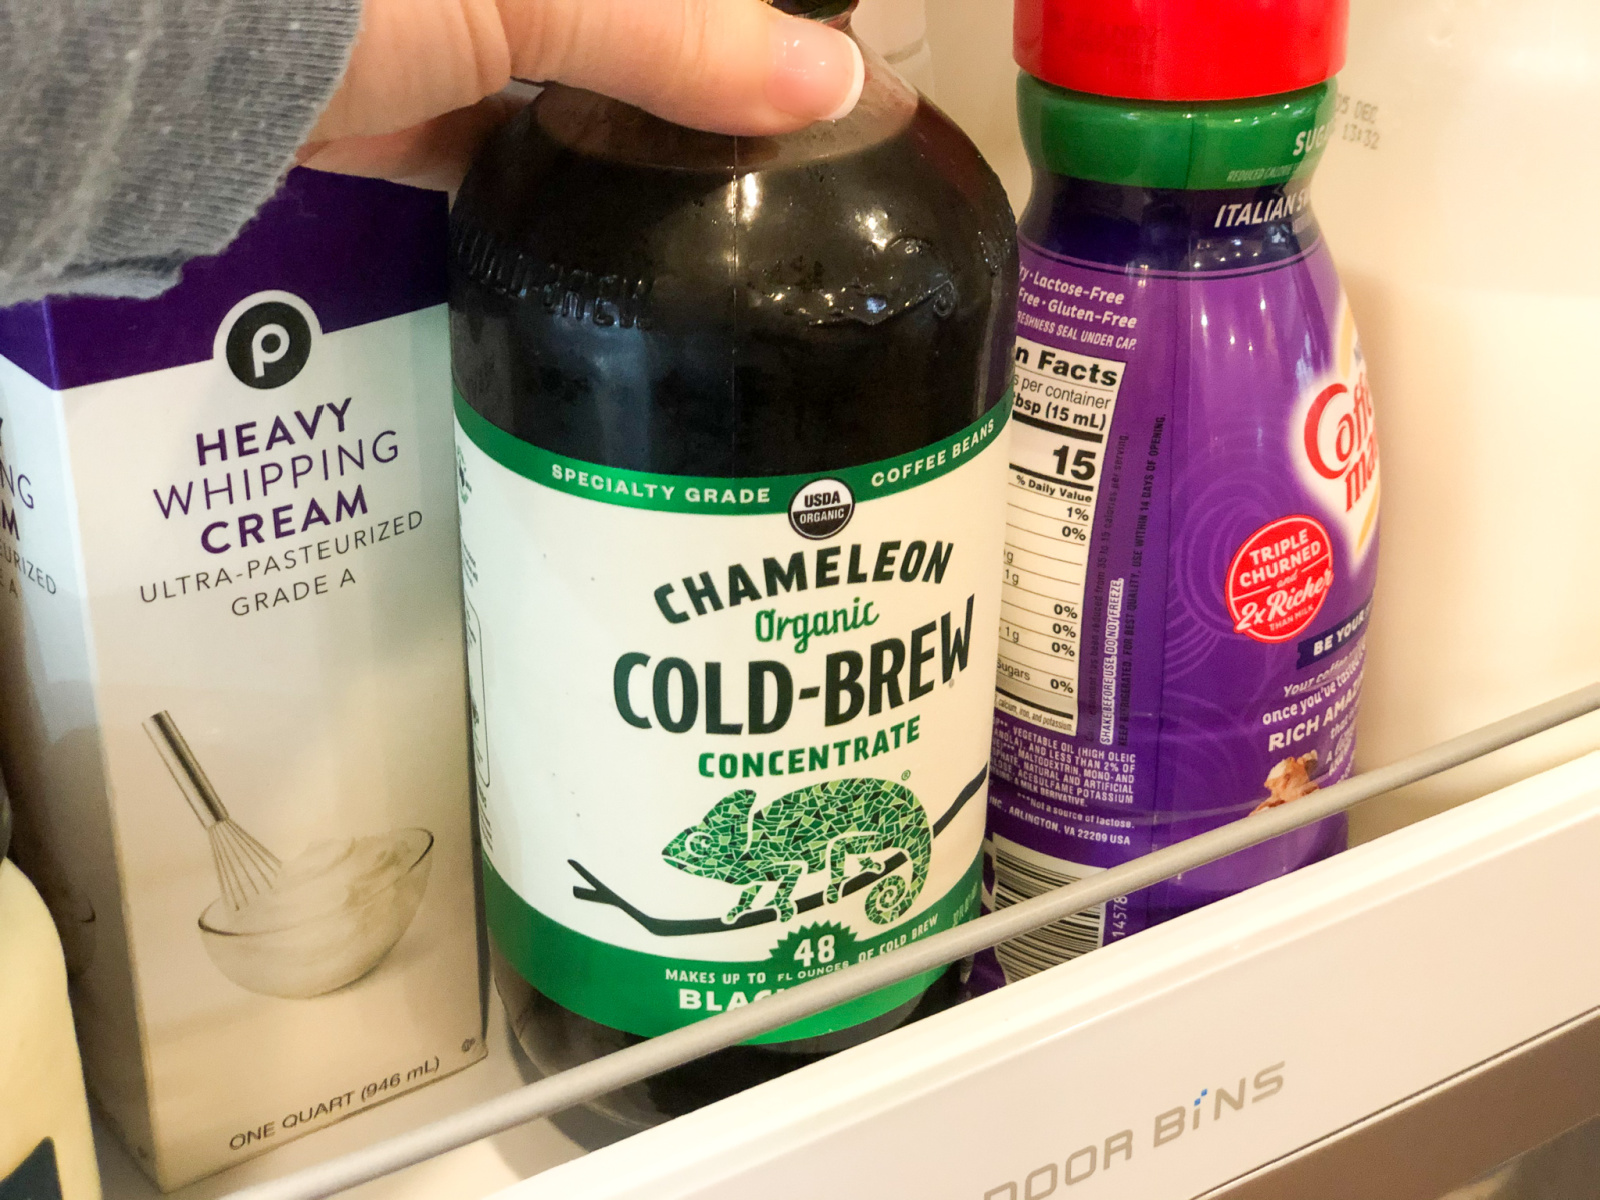 Chameleon Cold-Brew On Sale Buy One, Get One FREE Starting 1/2 At Publix on I Heart Publix